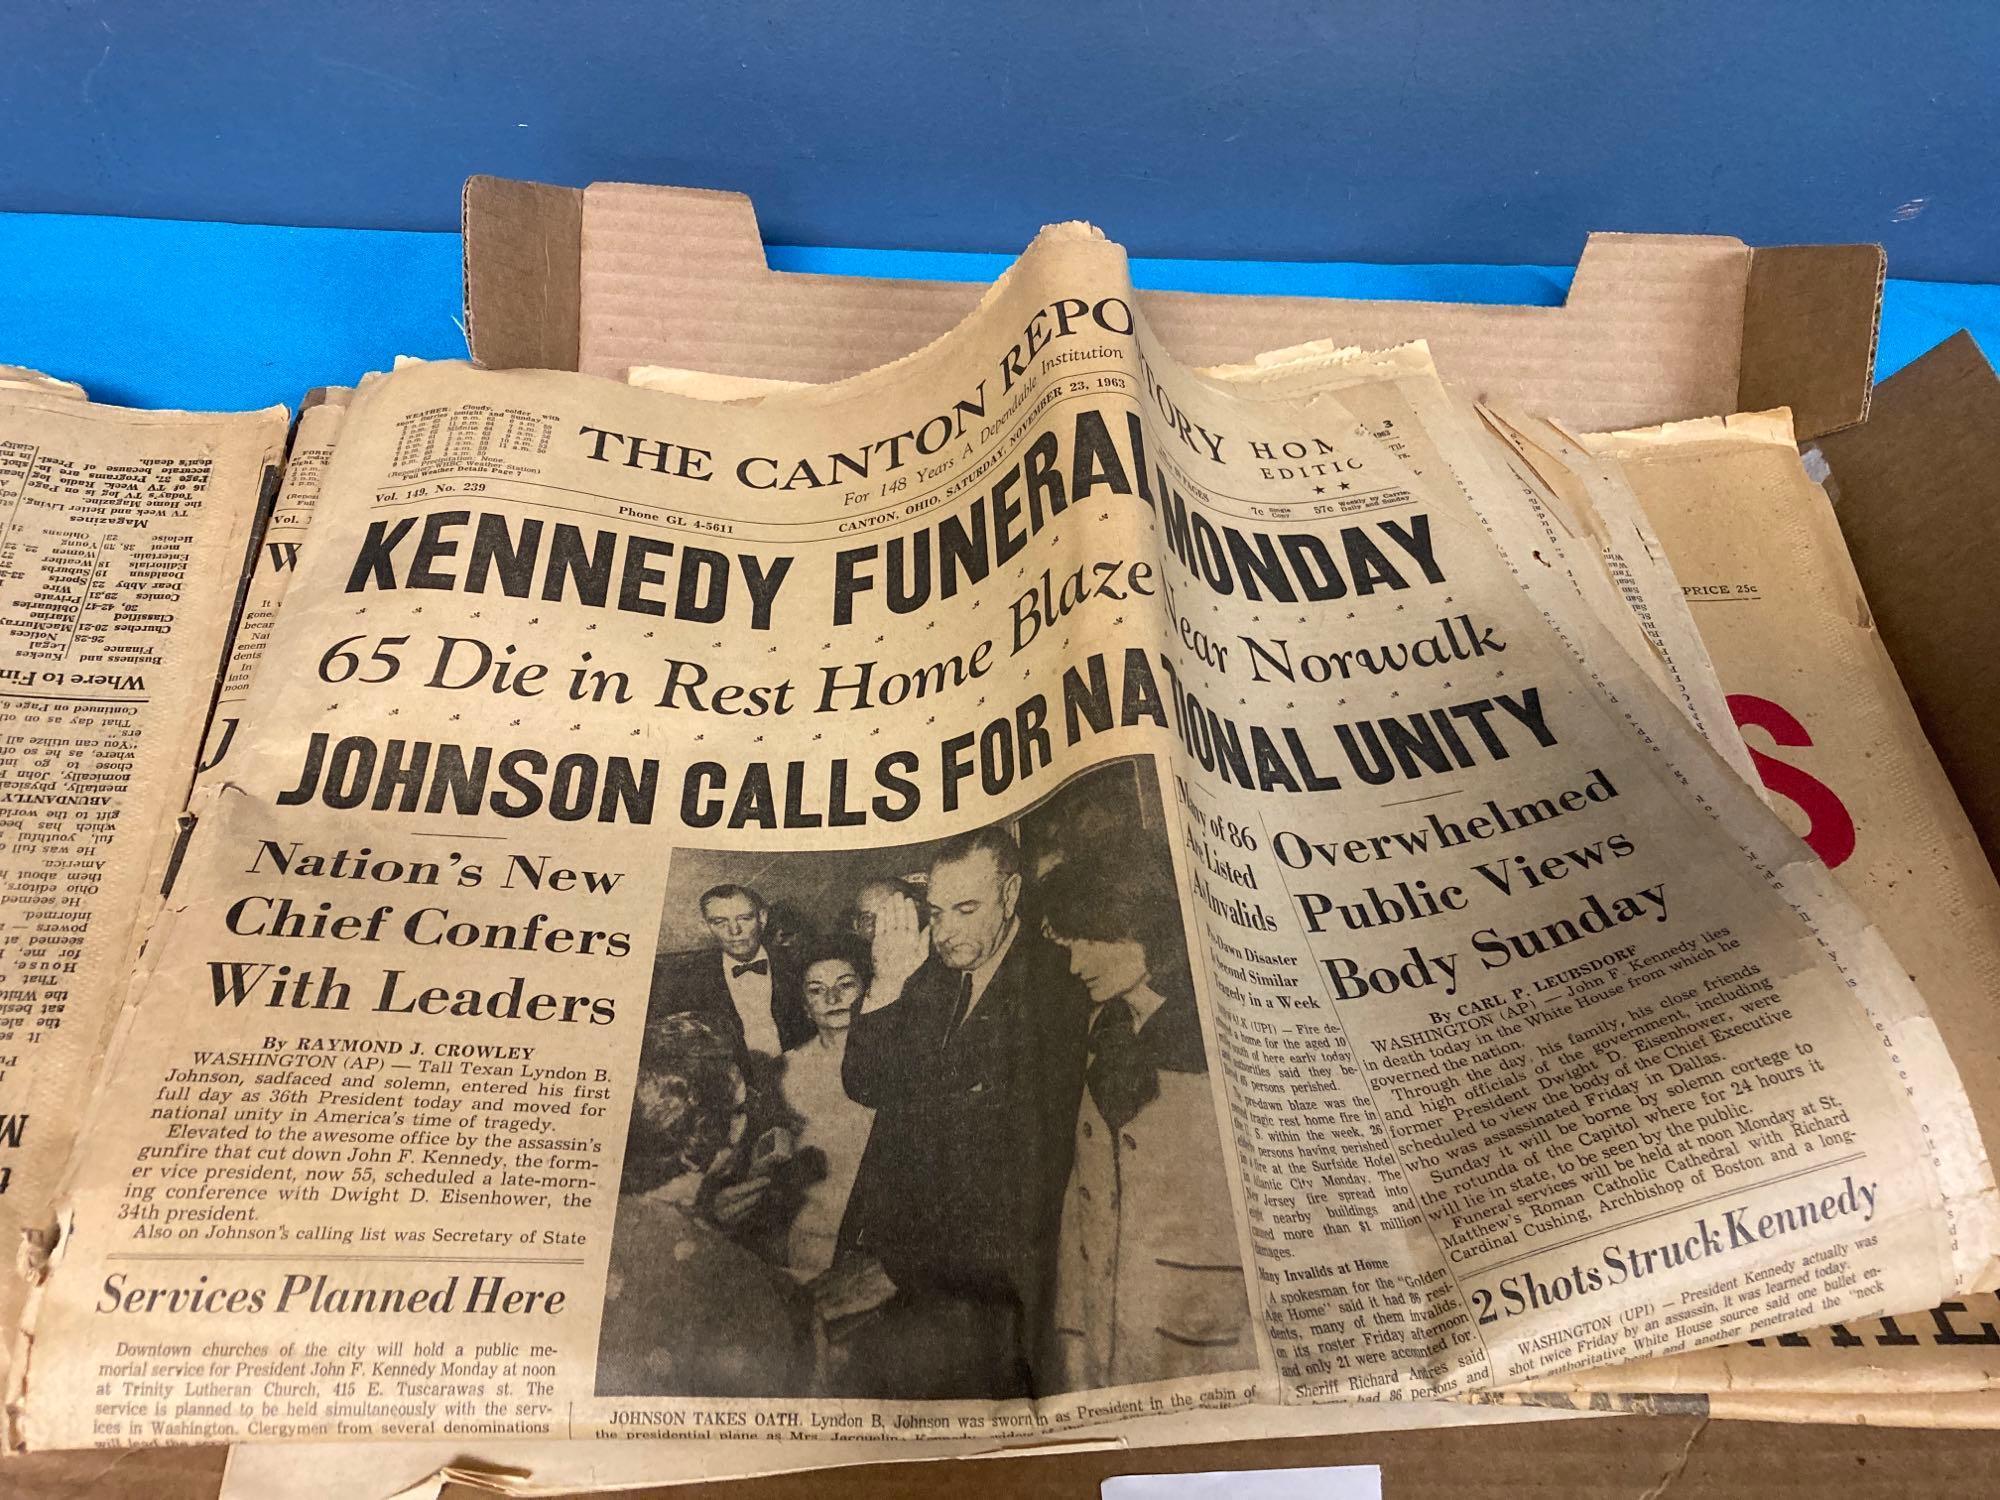 JFK book and newspapers about assassination